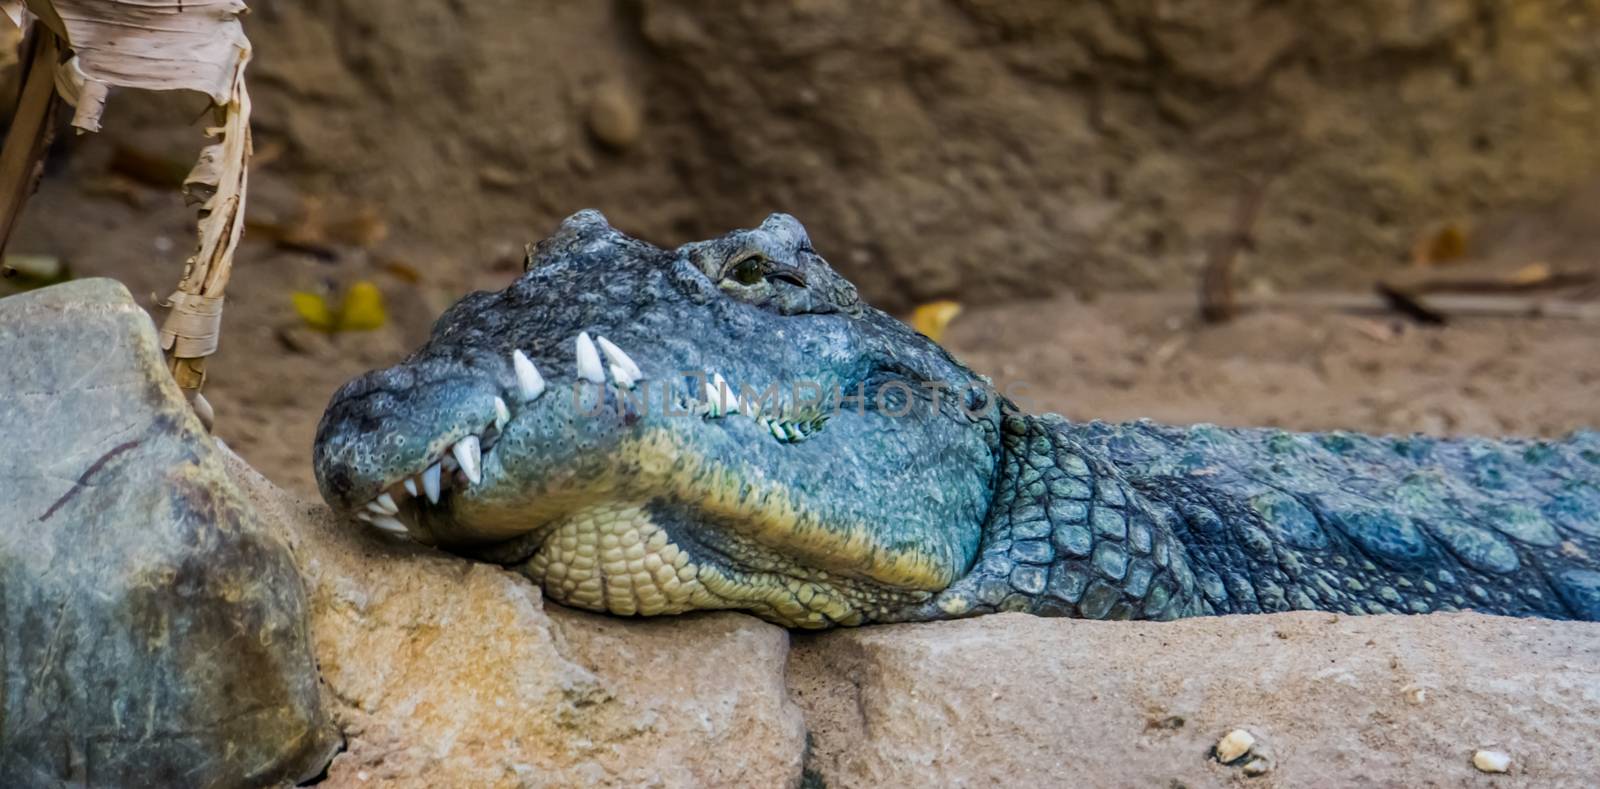 Nile crocodile with a deformed jaw in closeup, animal disability, exotic reptile specie from Africa